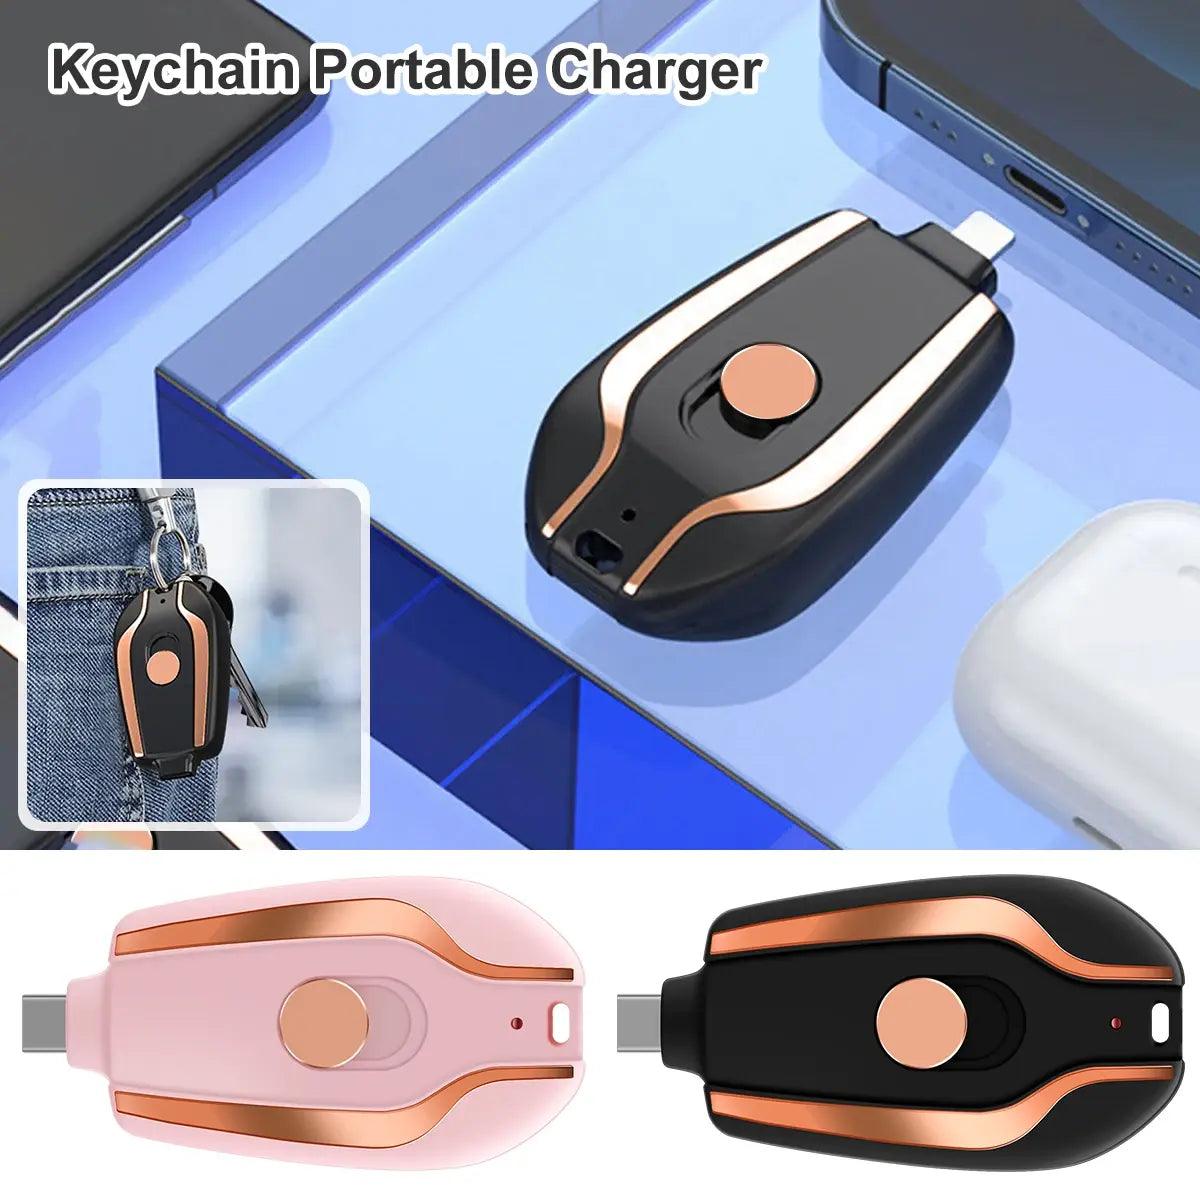 Portable Keychain Charger for Android Devices - ACO Marketplace